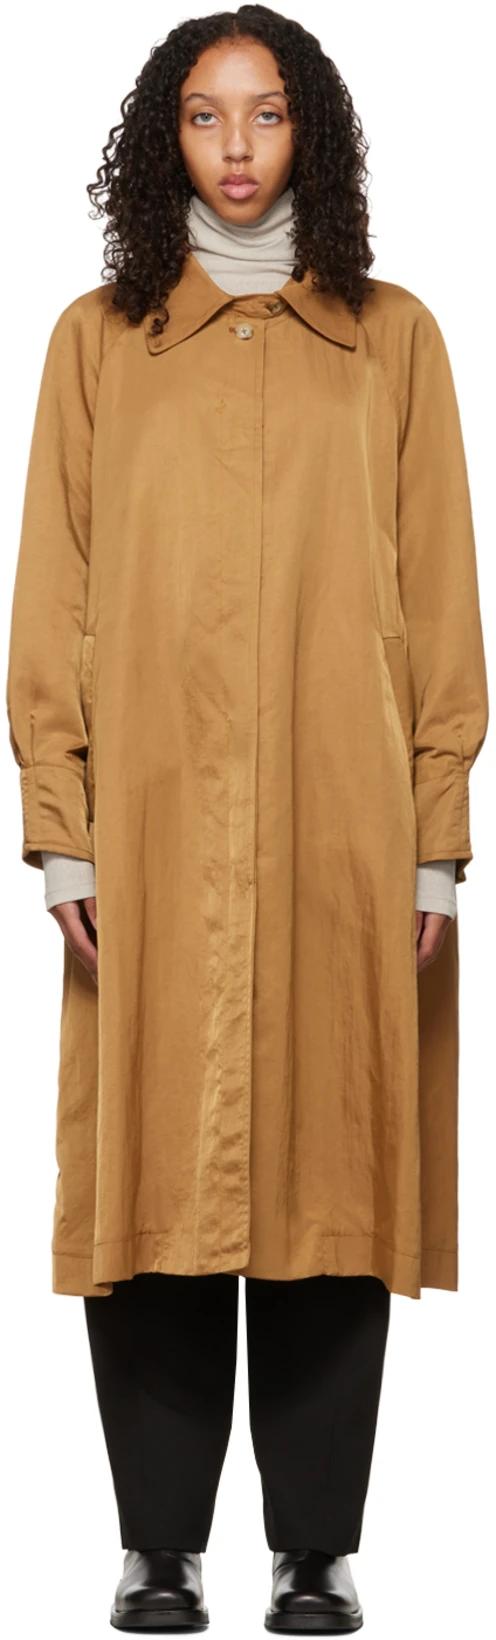 Tan Buttoned Trench Coat by DEVEAUX NEW YORK